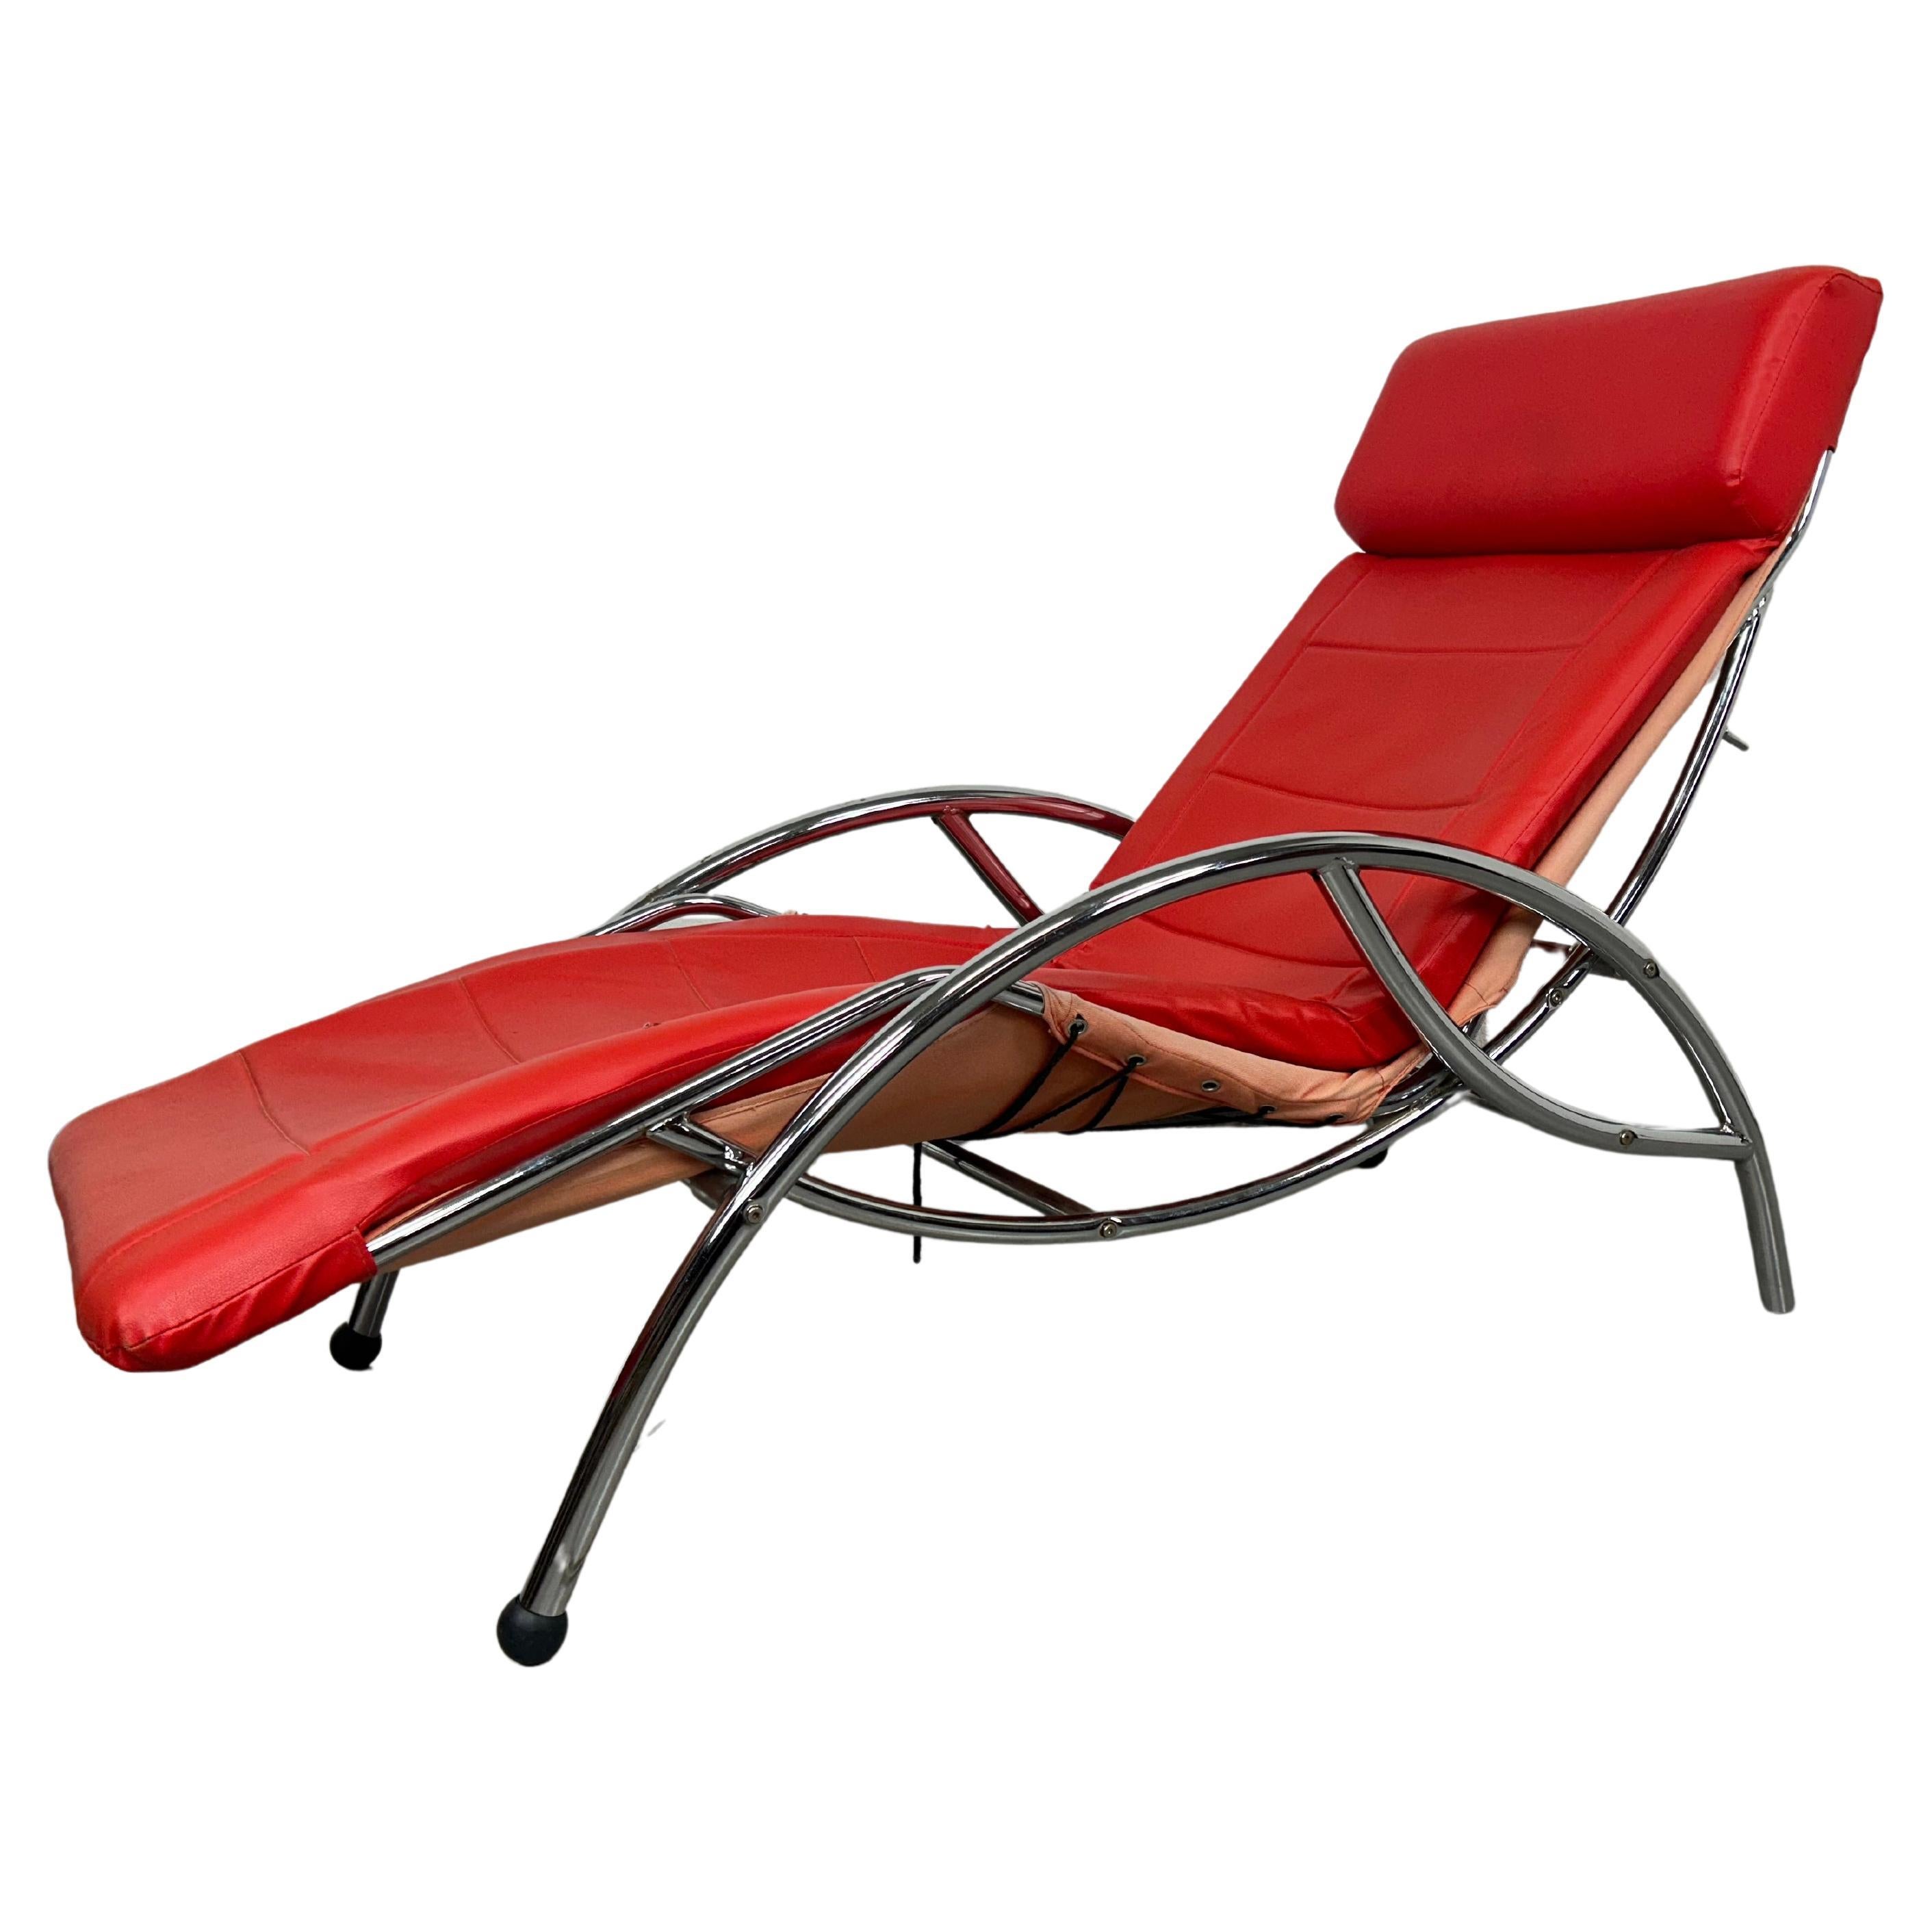 Red mid-century modern lounge chair